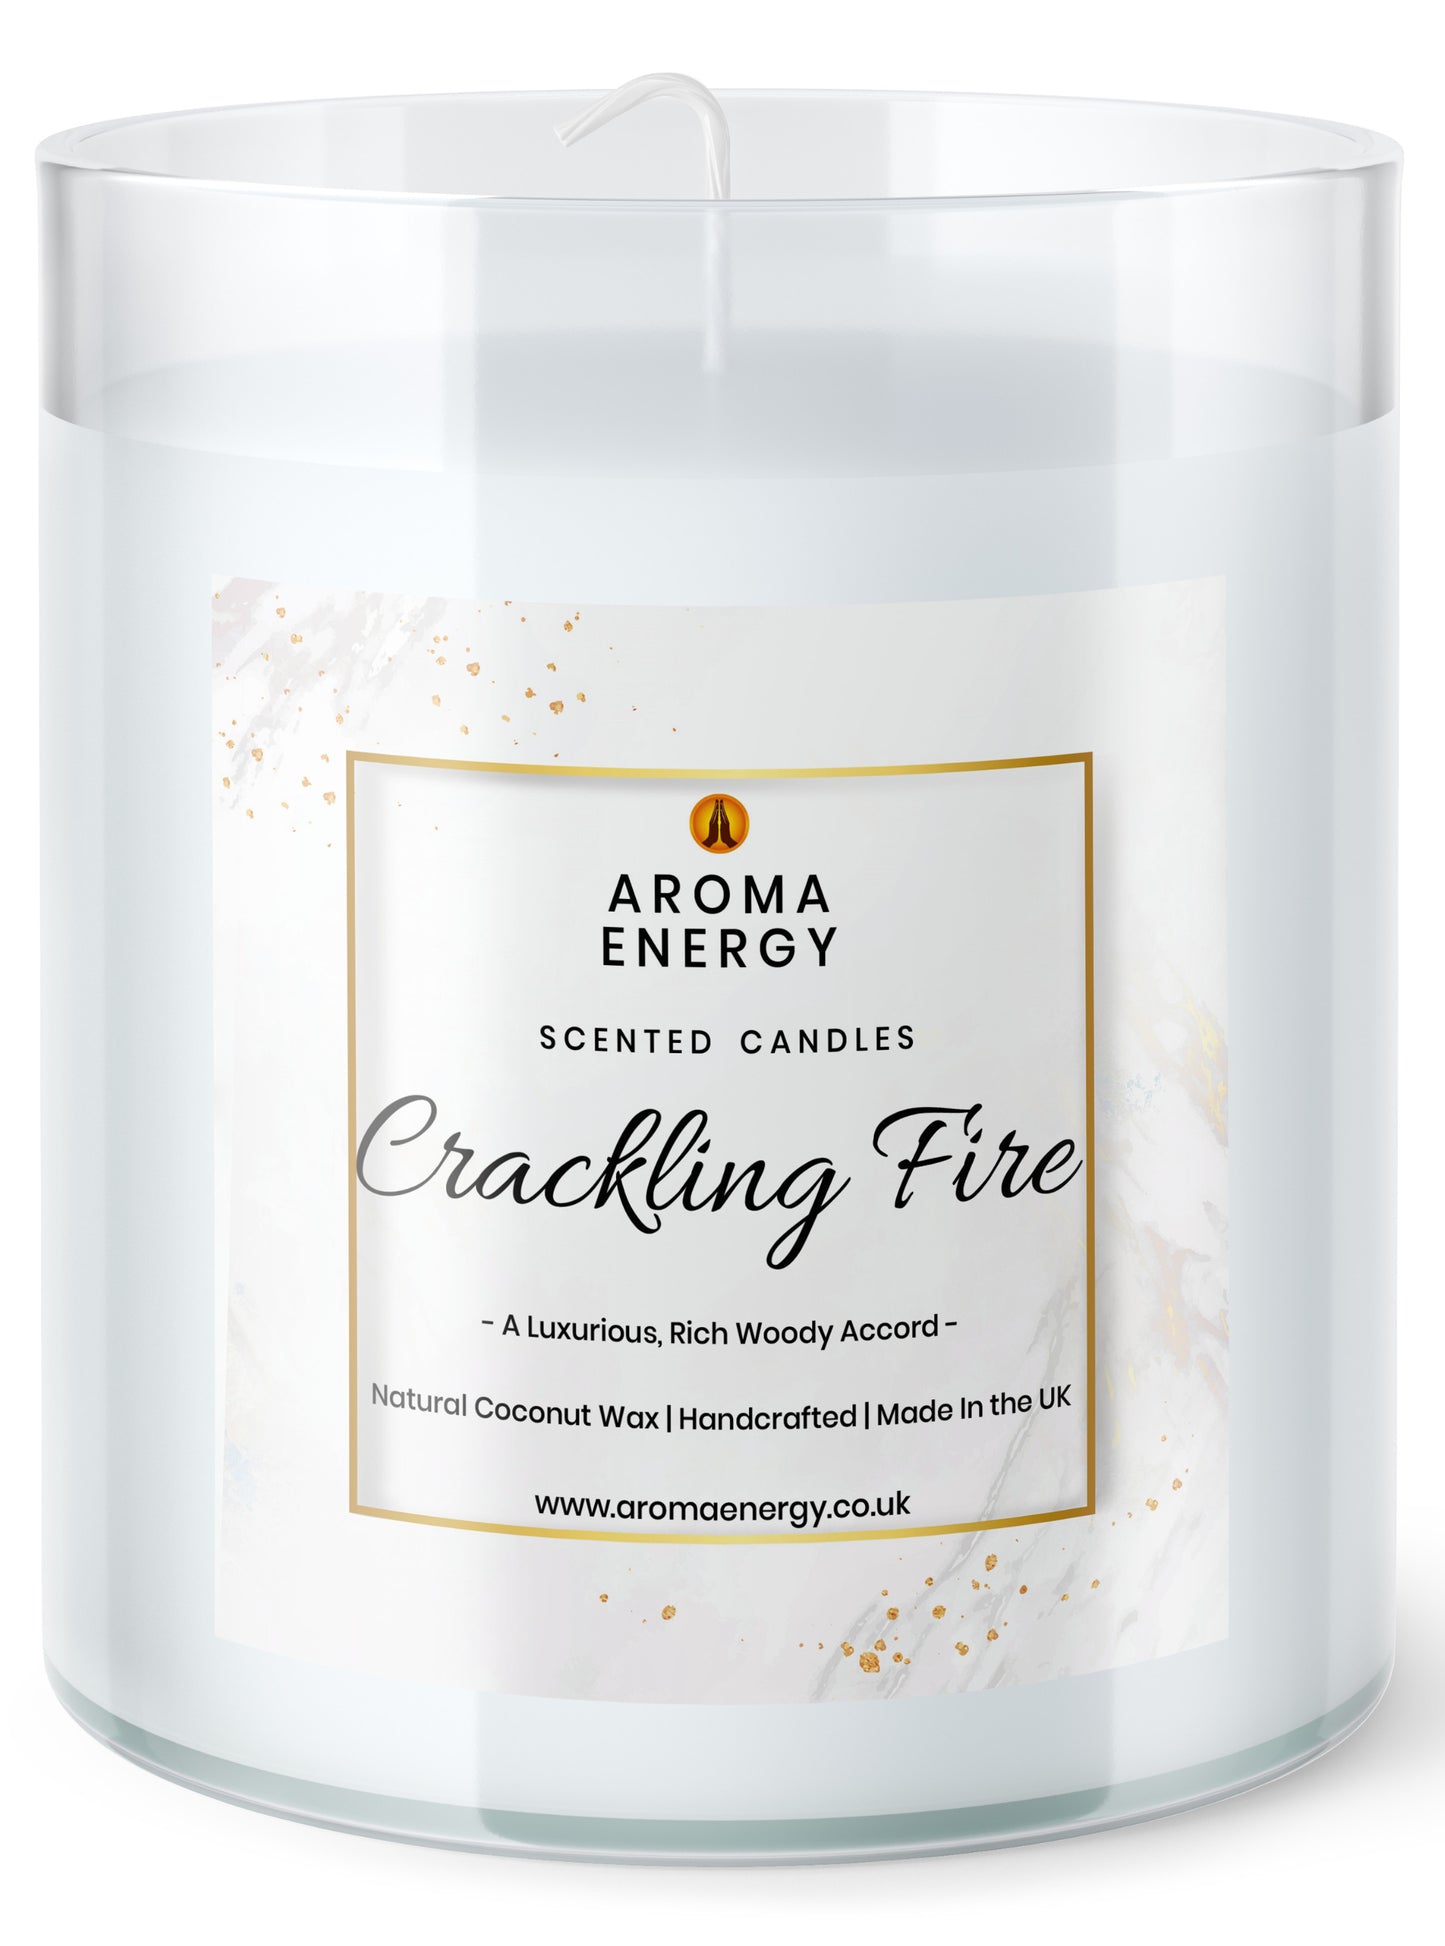 Crackling Fire Christmas Scented Candle | Best home fragrance | Coconut Wax - Aroma Energy